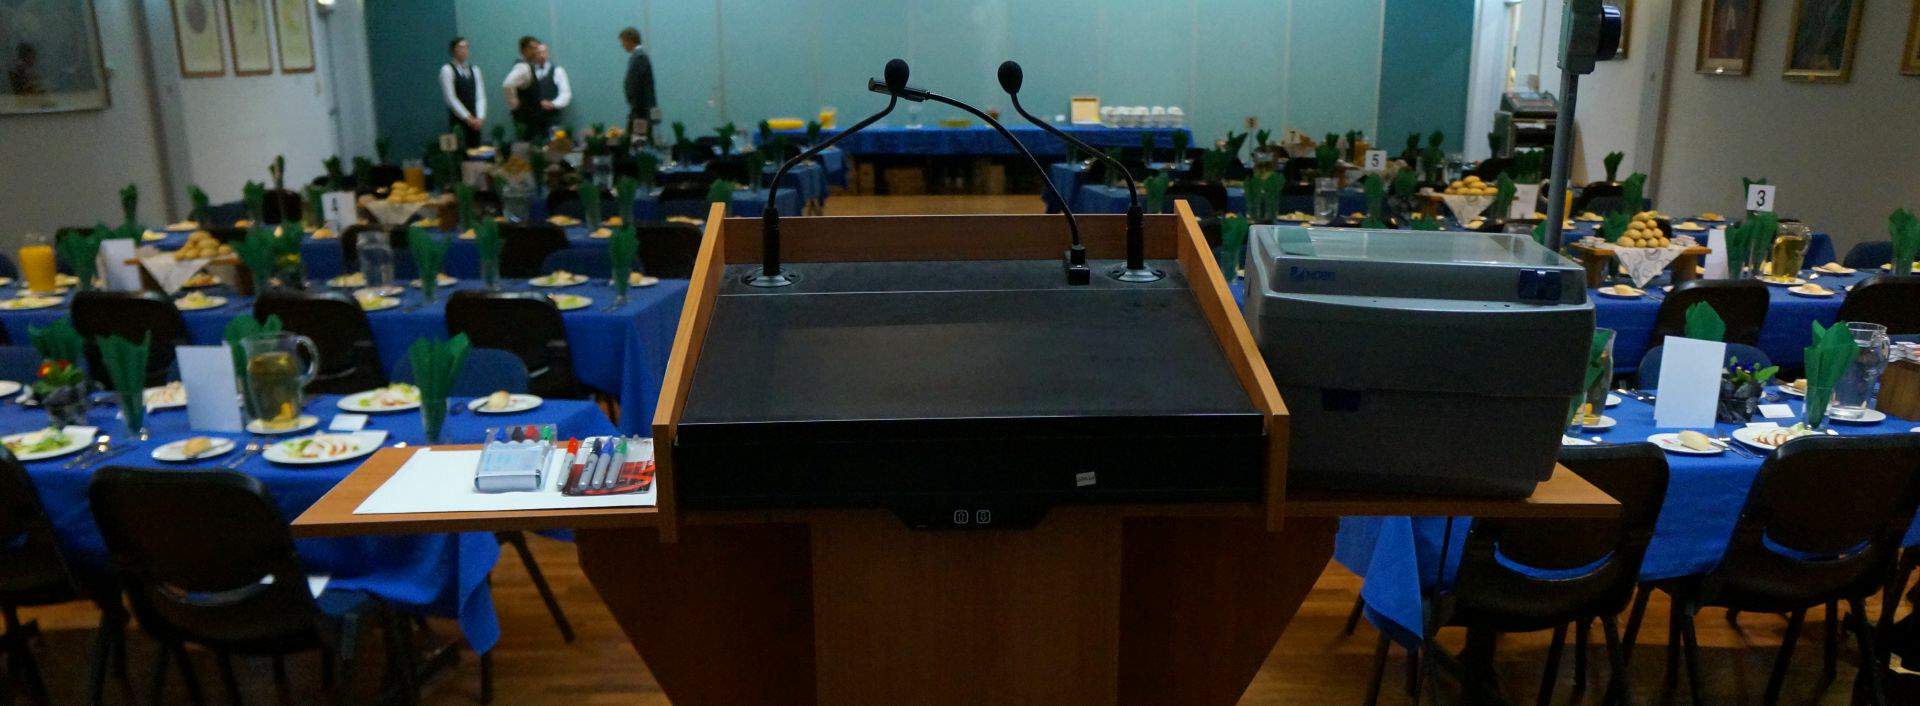 College lectern